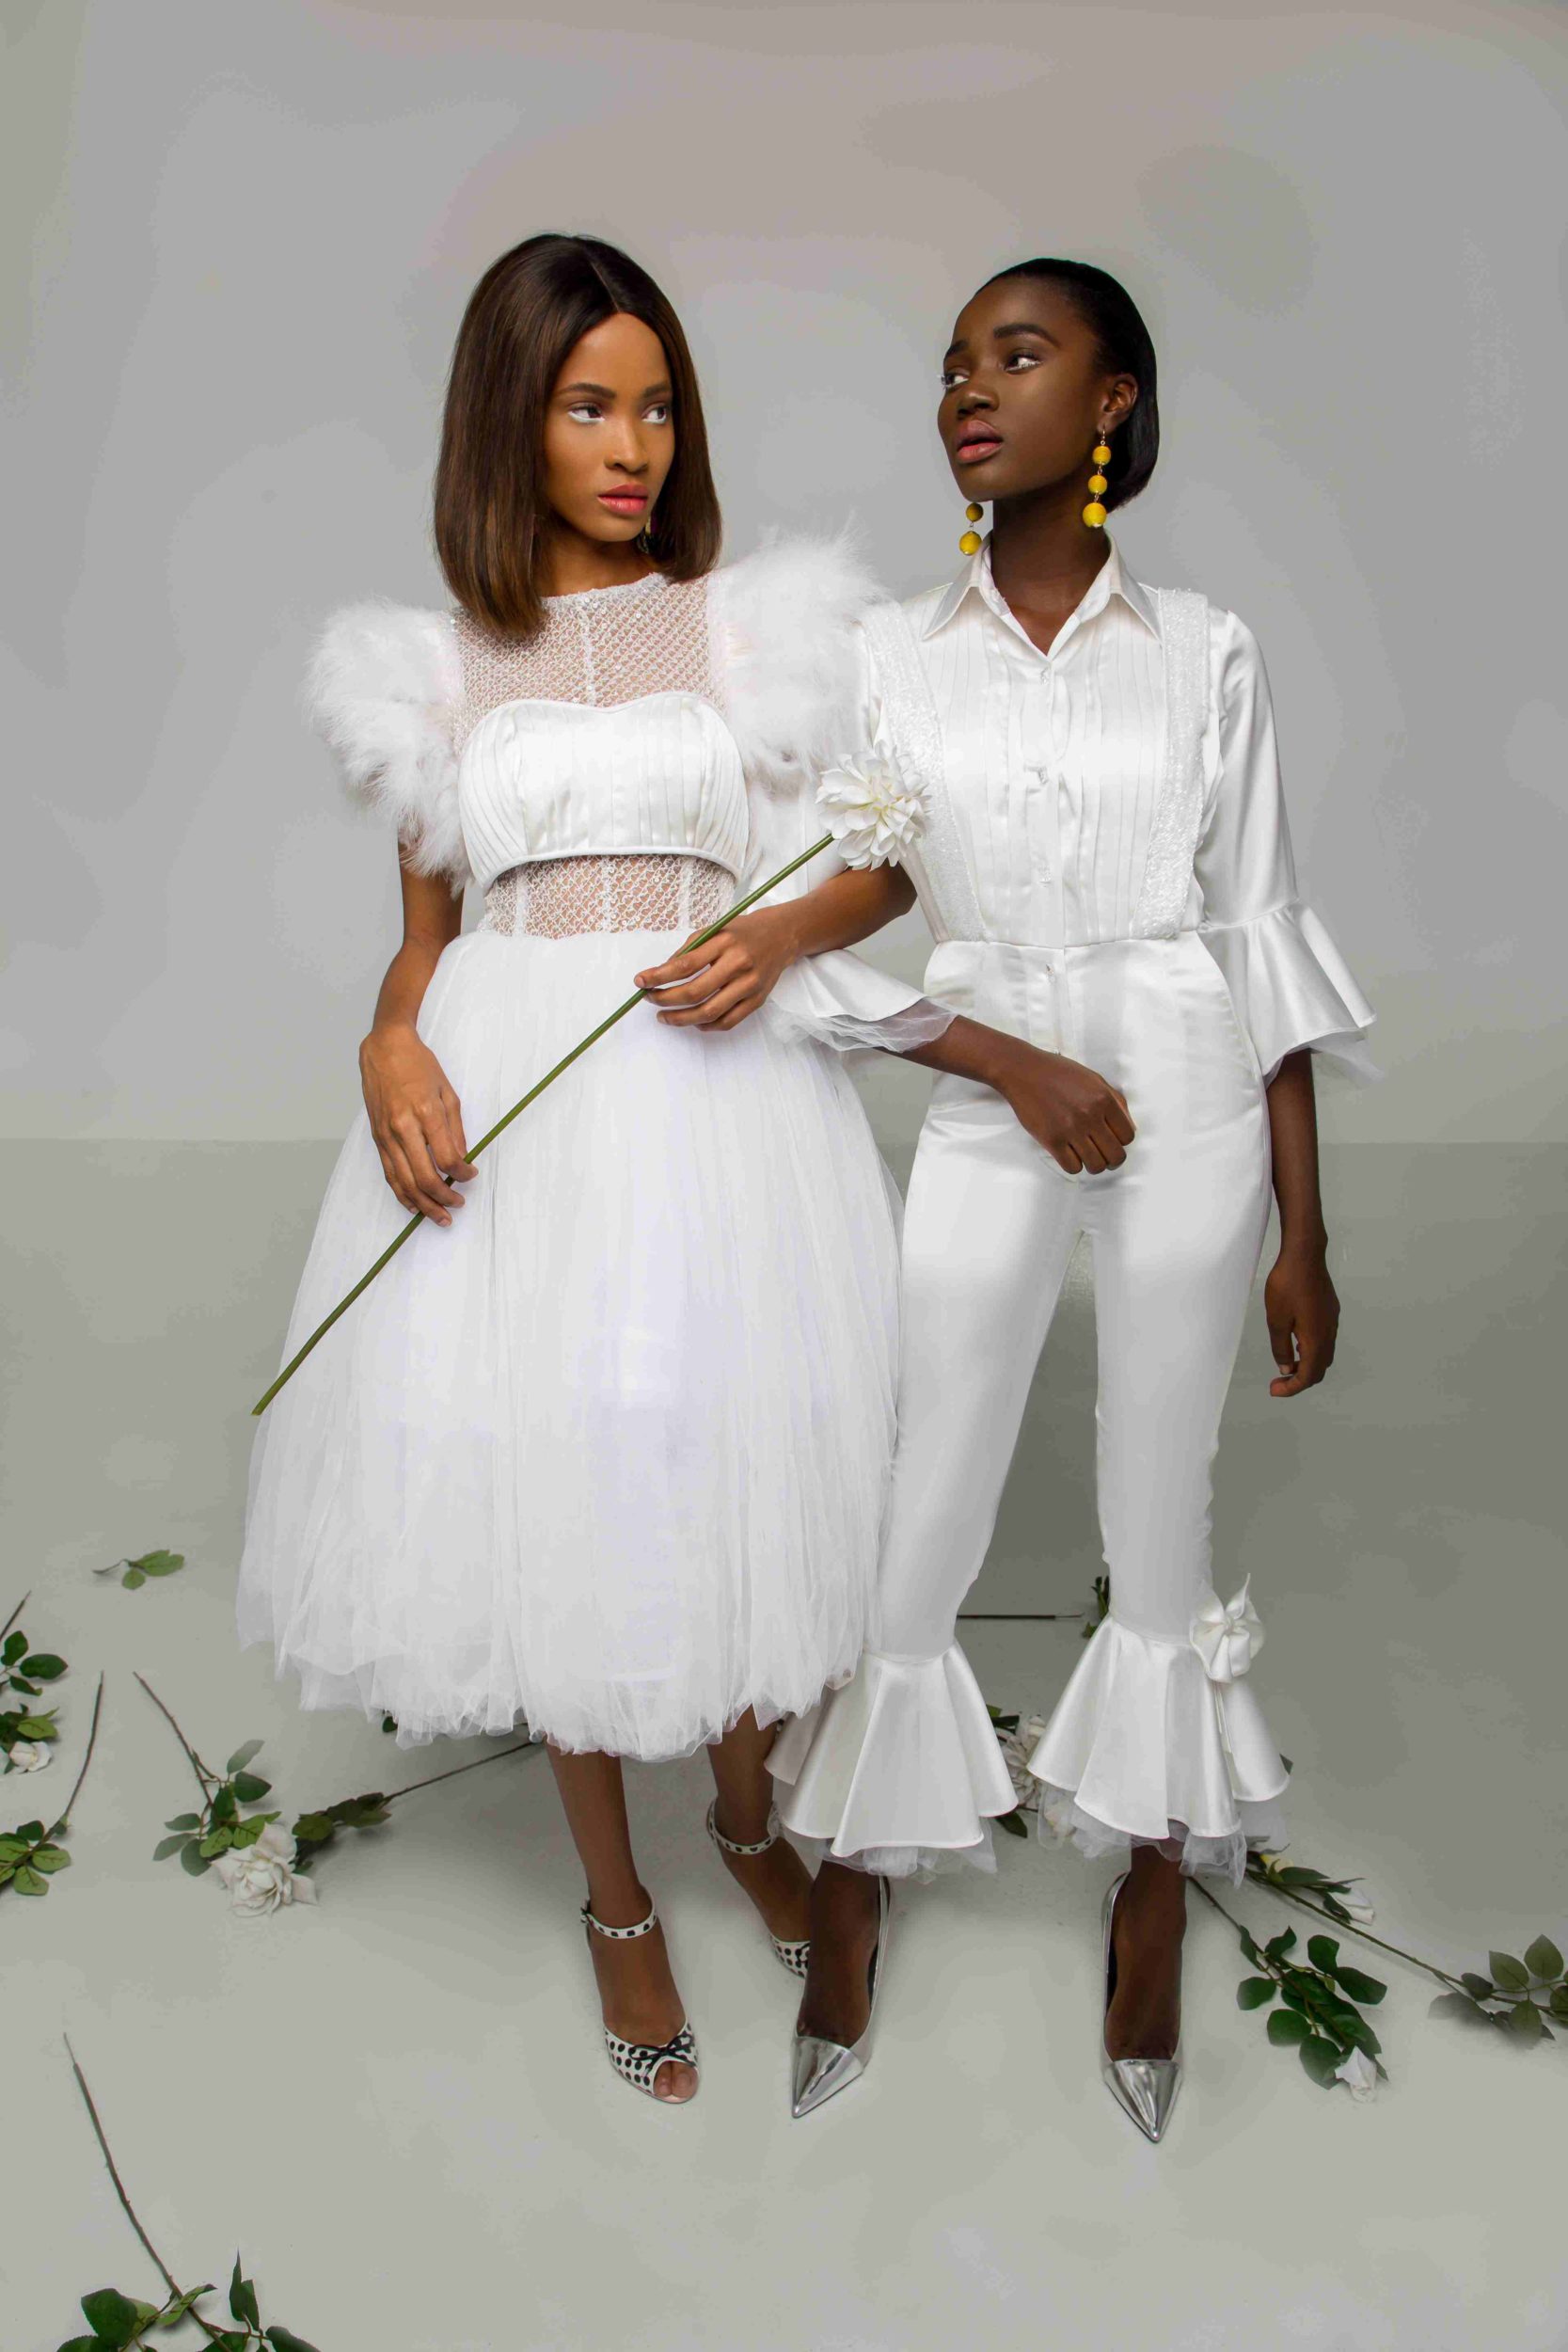 ‘A Walk To Remember’ – Inside the Mazelle Studio SS18 Collection